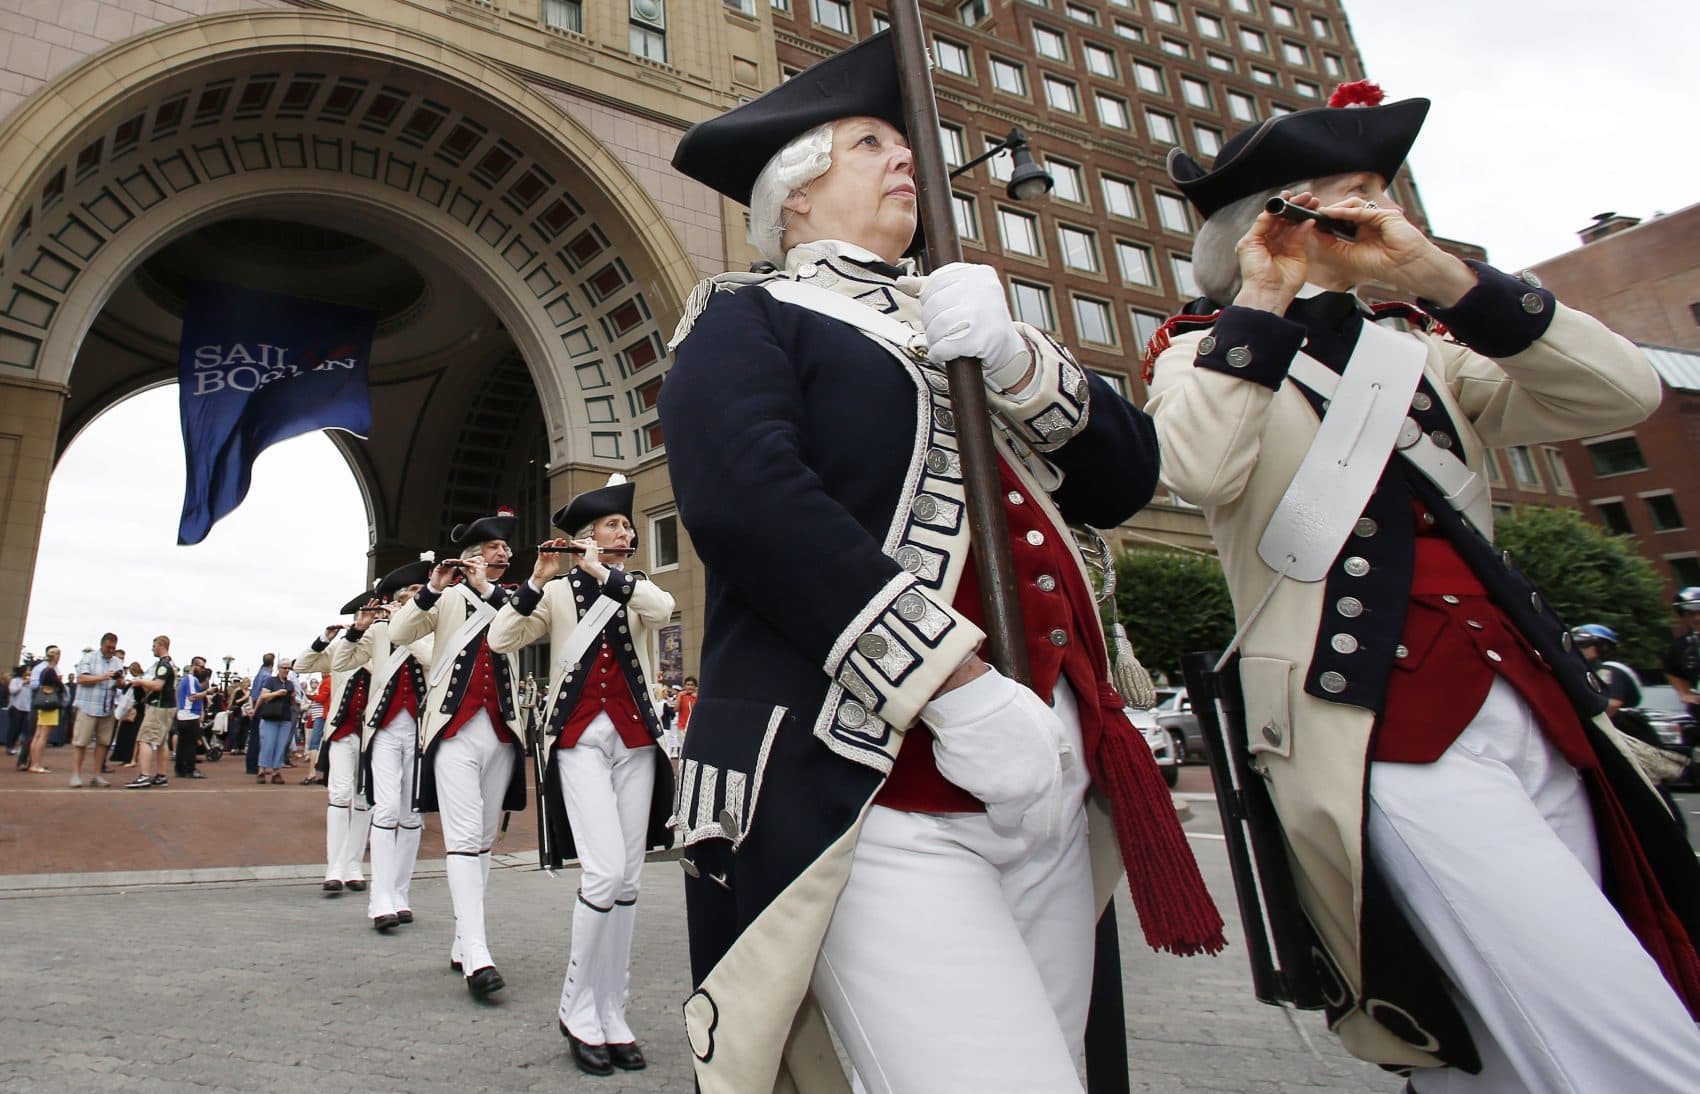 The Middlesex County Volunteers Fife and Drums march away following opening ceremonies for the Sail Boston tall ships event on Friday in Boston. (AP Photo/Michael Dwyer)